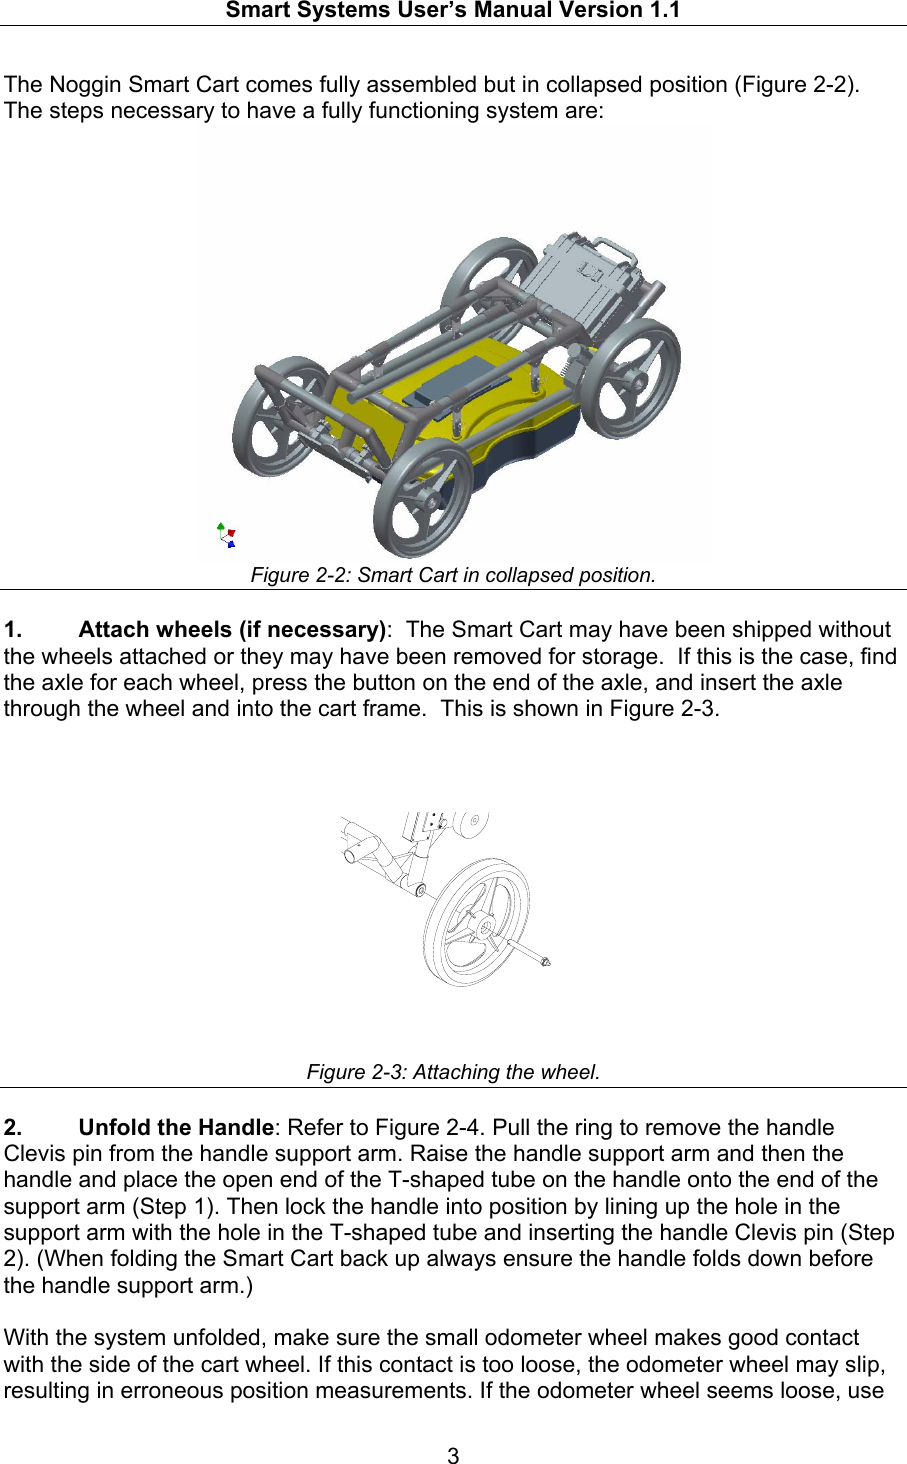   Smart Systems User’s Manual Version 1.1  3  The Noggin Smart Cart comes fully assembled but in collapsed position (Figure 2-2). The steps necessary to have a fully functioning system are:  Figure 2-2: Smart Cart in collapsed position.  1.  Attach wheels (if necessary):  The Smart Cart may have been shipped without the wheels attached or they may have been removed for storage.  If this is the case, find the axle for each wheel, press the button on the end of the axle, and insert the axle through the wheel and into the cart frame.  This is shown in Figure 2-3. Figure 2-3: Attaching the wheel.  2.  Unfold the Handle: Refer to Figure 2-4. Pull the ring to remove the handle Clevis pin from the handle support arm. Raise the handle support arm and then the handle and place the open end of the T-shaped tube on the handle onto the end of the support arm (Step 1). Then lock the handle into position by lining up the hole in the support arm with the hole in the T-shaped tube and inserting the handle Clevis pin (Step 2). (When folding the Smart Cart back up always ensure the handle folds down before the handle support arm.)  With the system unfolded, make sure the small odometer wheel makes good contact with the side of the cart wheel. If this contact is too loose, the odometer wheel may slip, resulting in erroneous position measurements. If the odometer wheel seems loose, use 